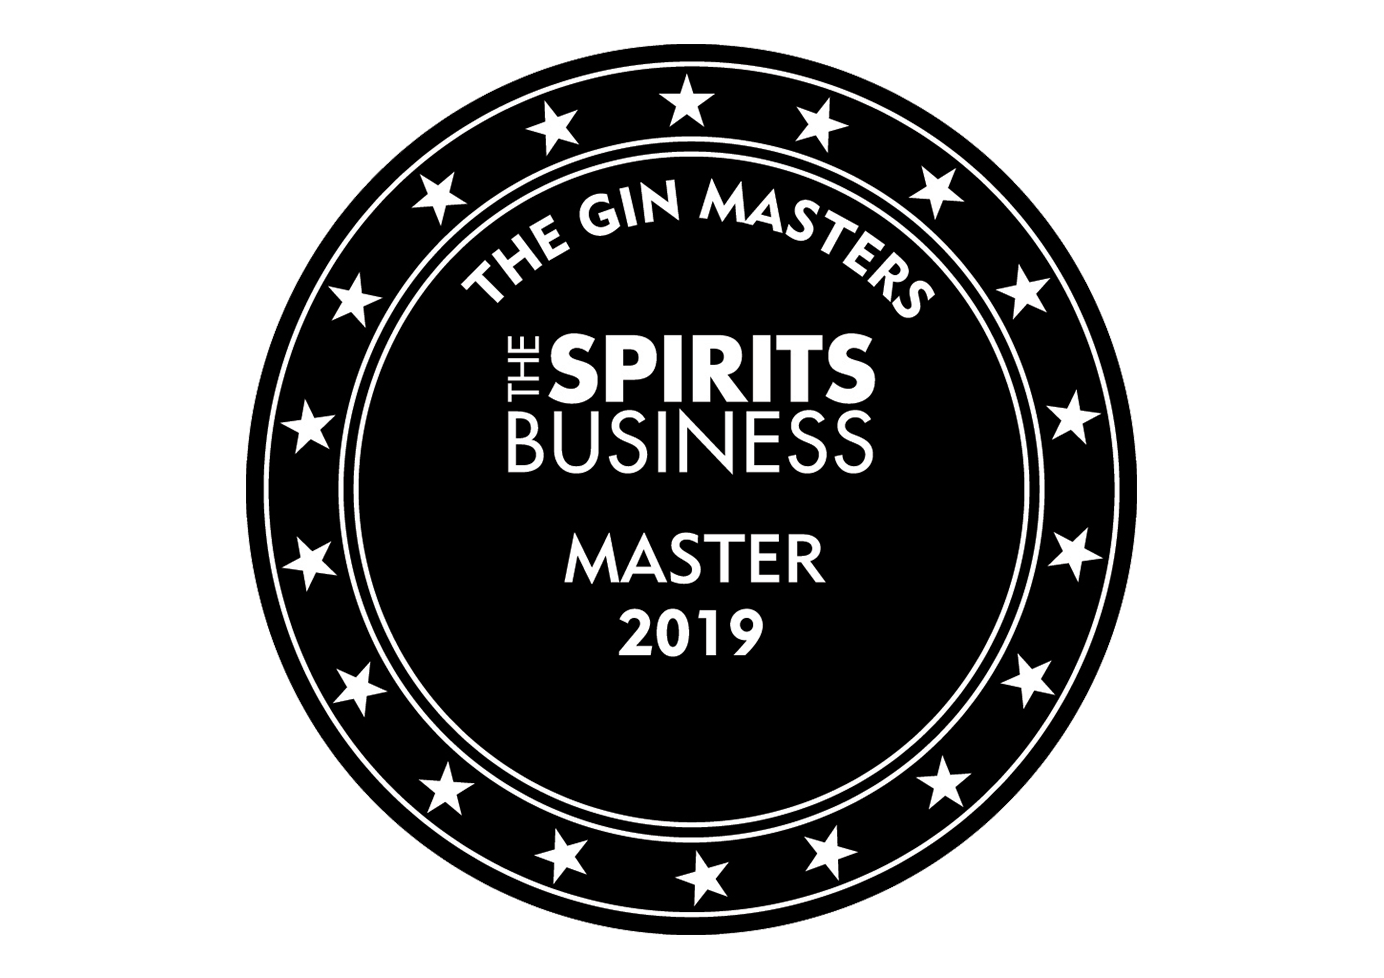 Shortcross storms Gin Masters 2019